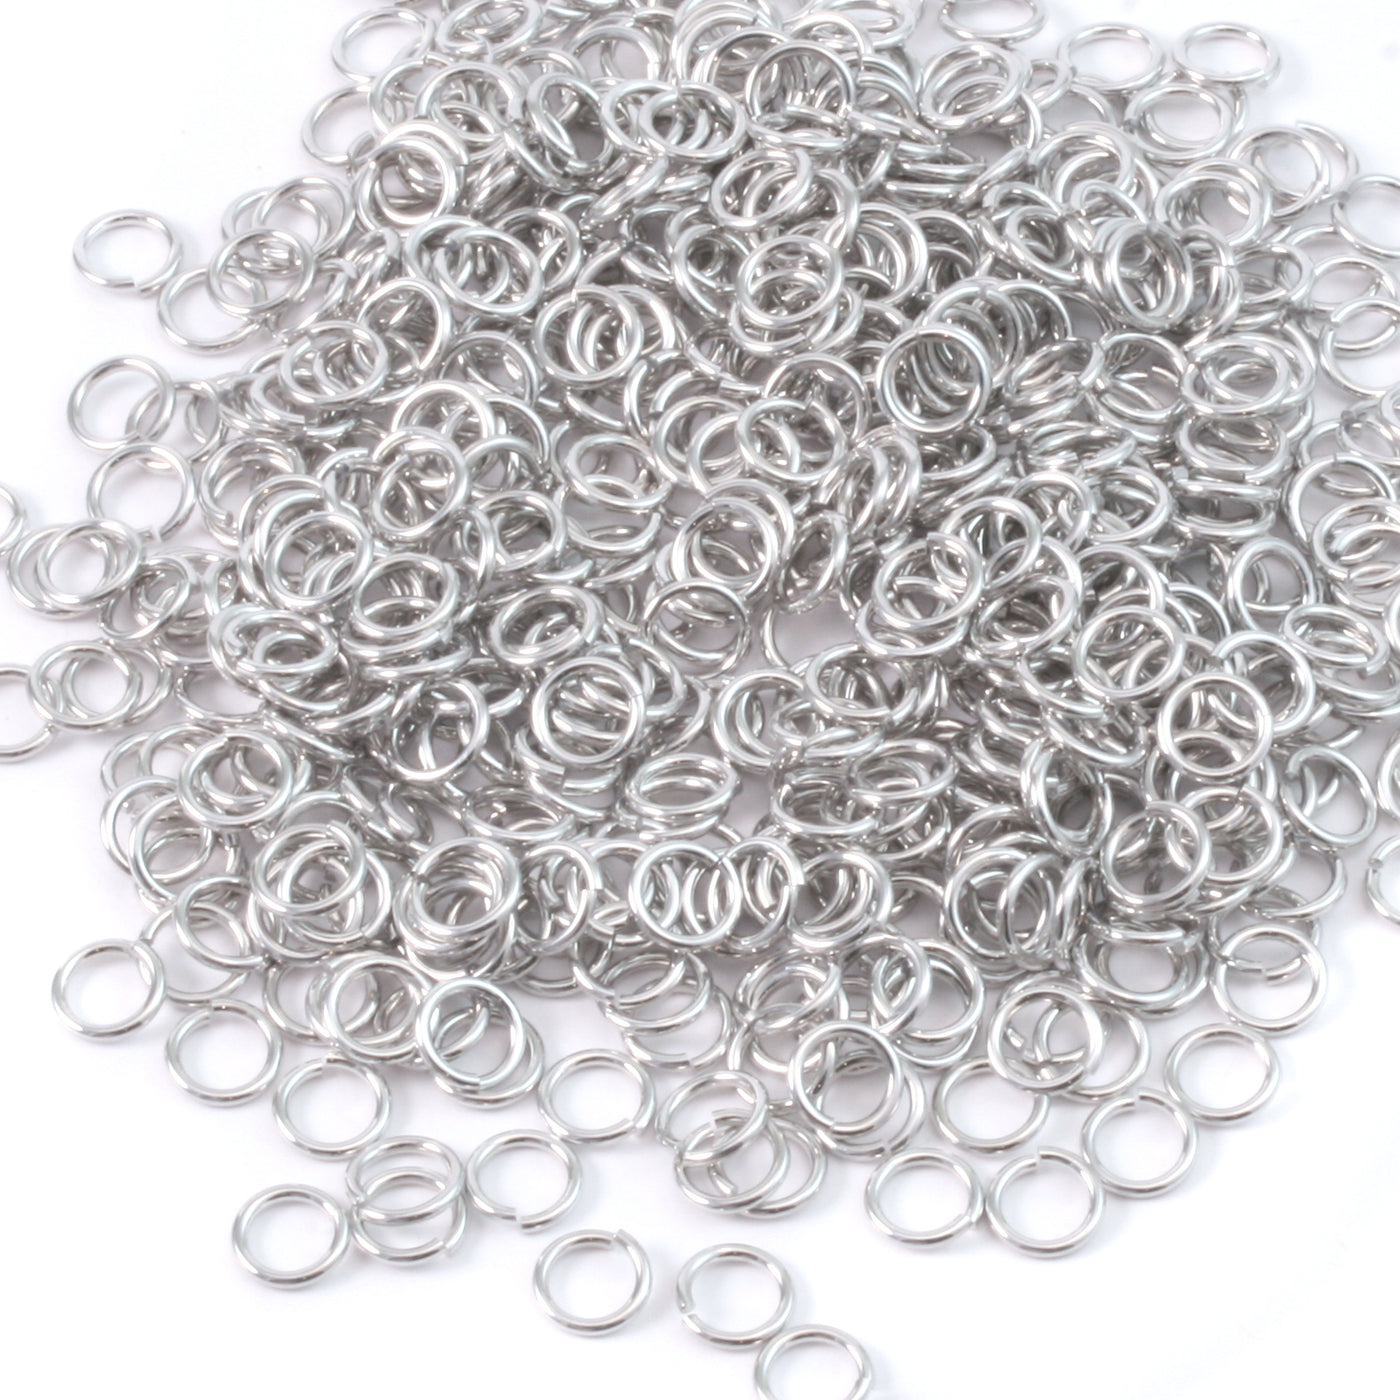 20 AWG Stainless Steel Jump Rings - 1 Ounce